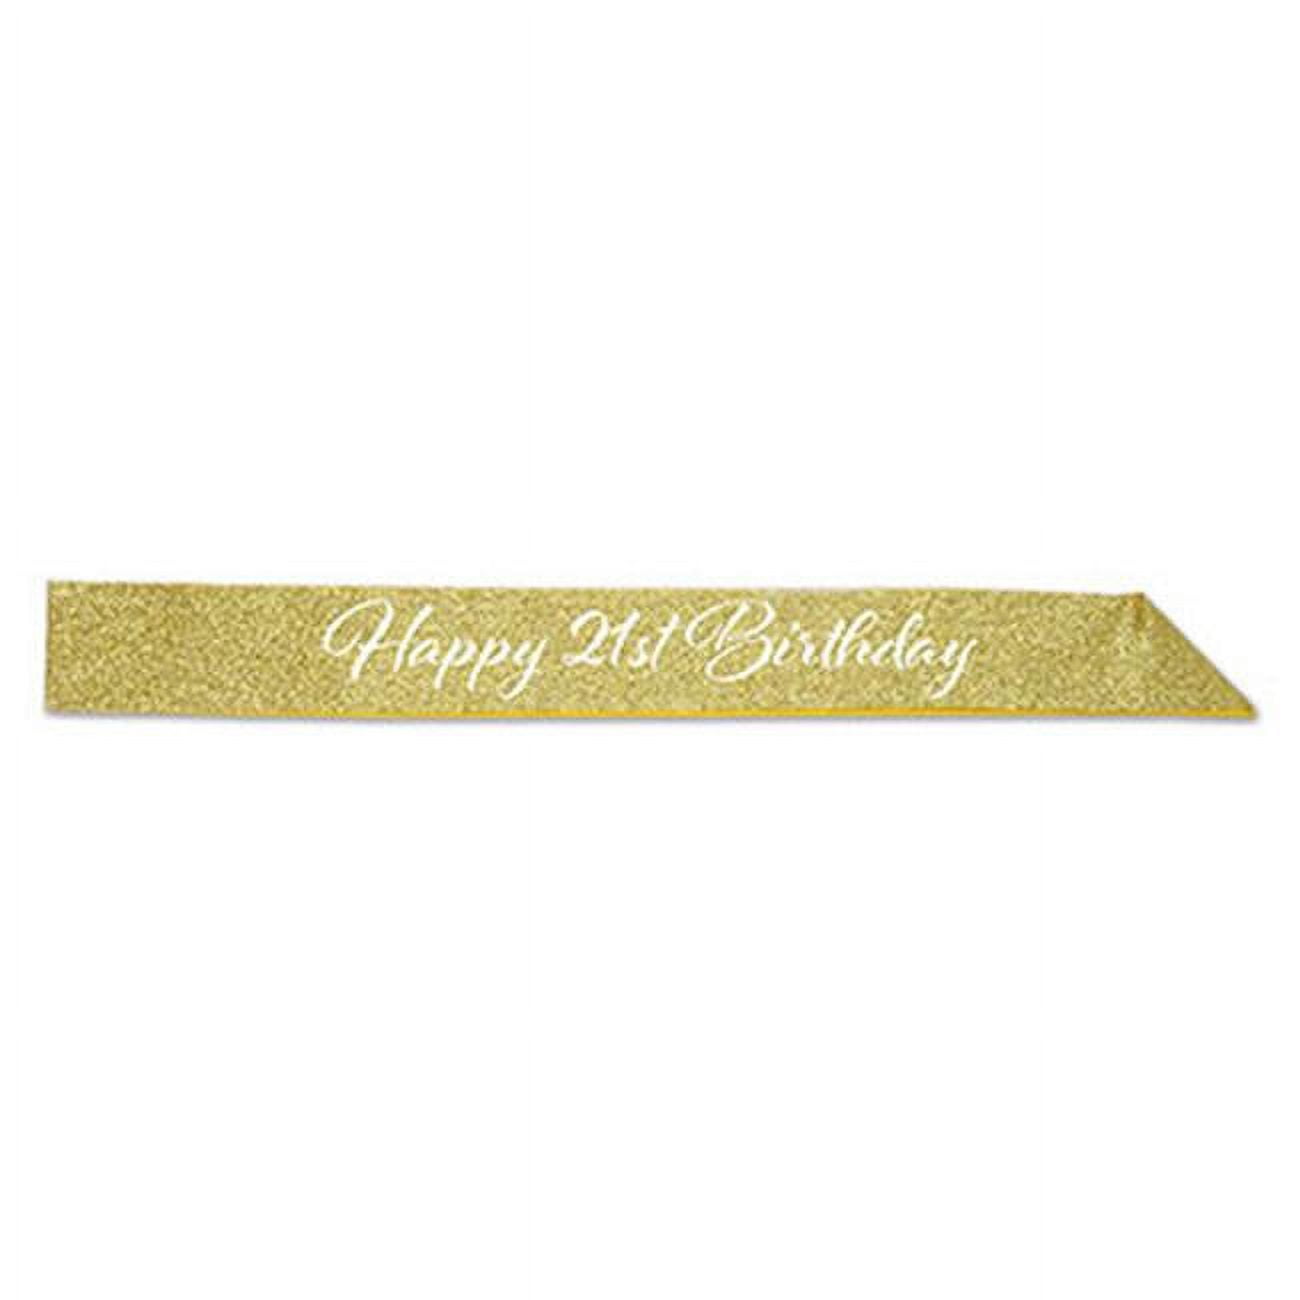 Picture of Beistle 66020 32.5 x 3.5 in. Happy 21st Birthday Glittered Sash - Pack of 6